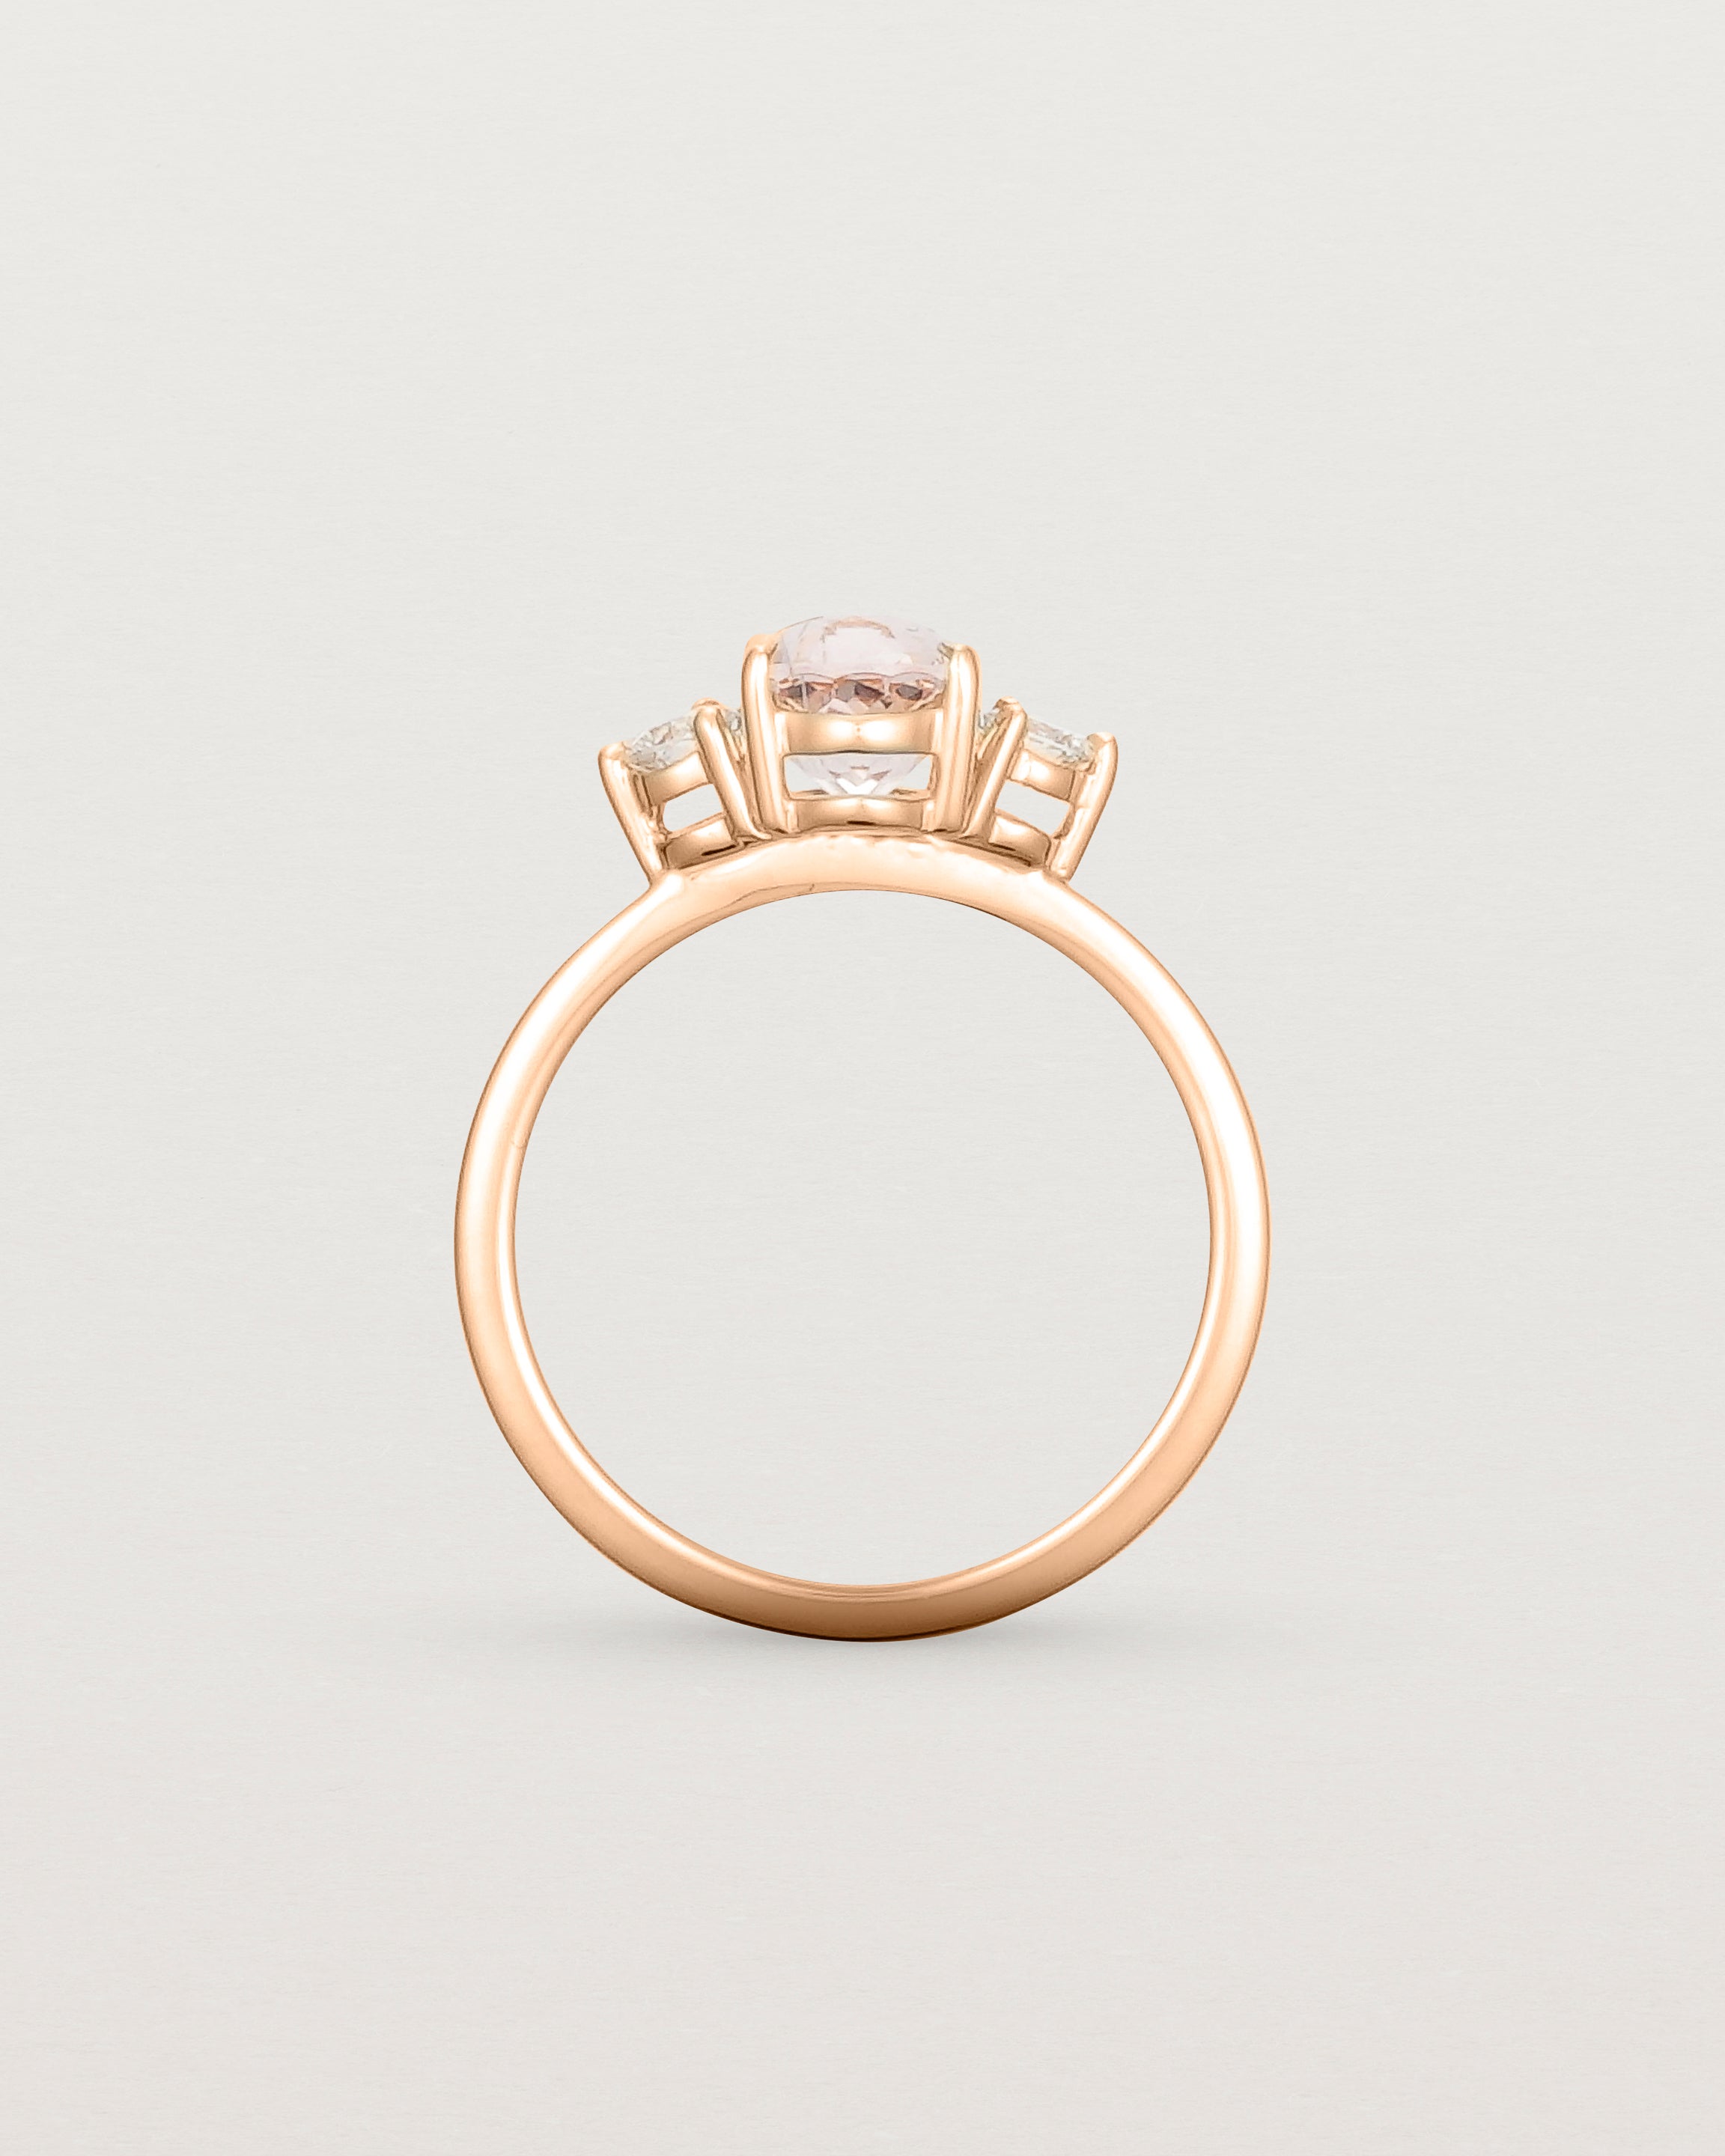 Standing view of the Una Oval Trio Ring | Morganite & Diamonds | Rose Gold.